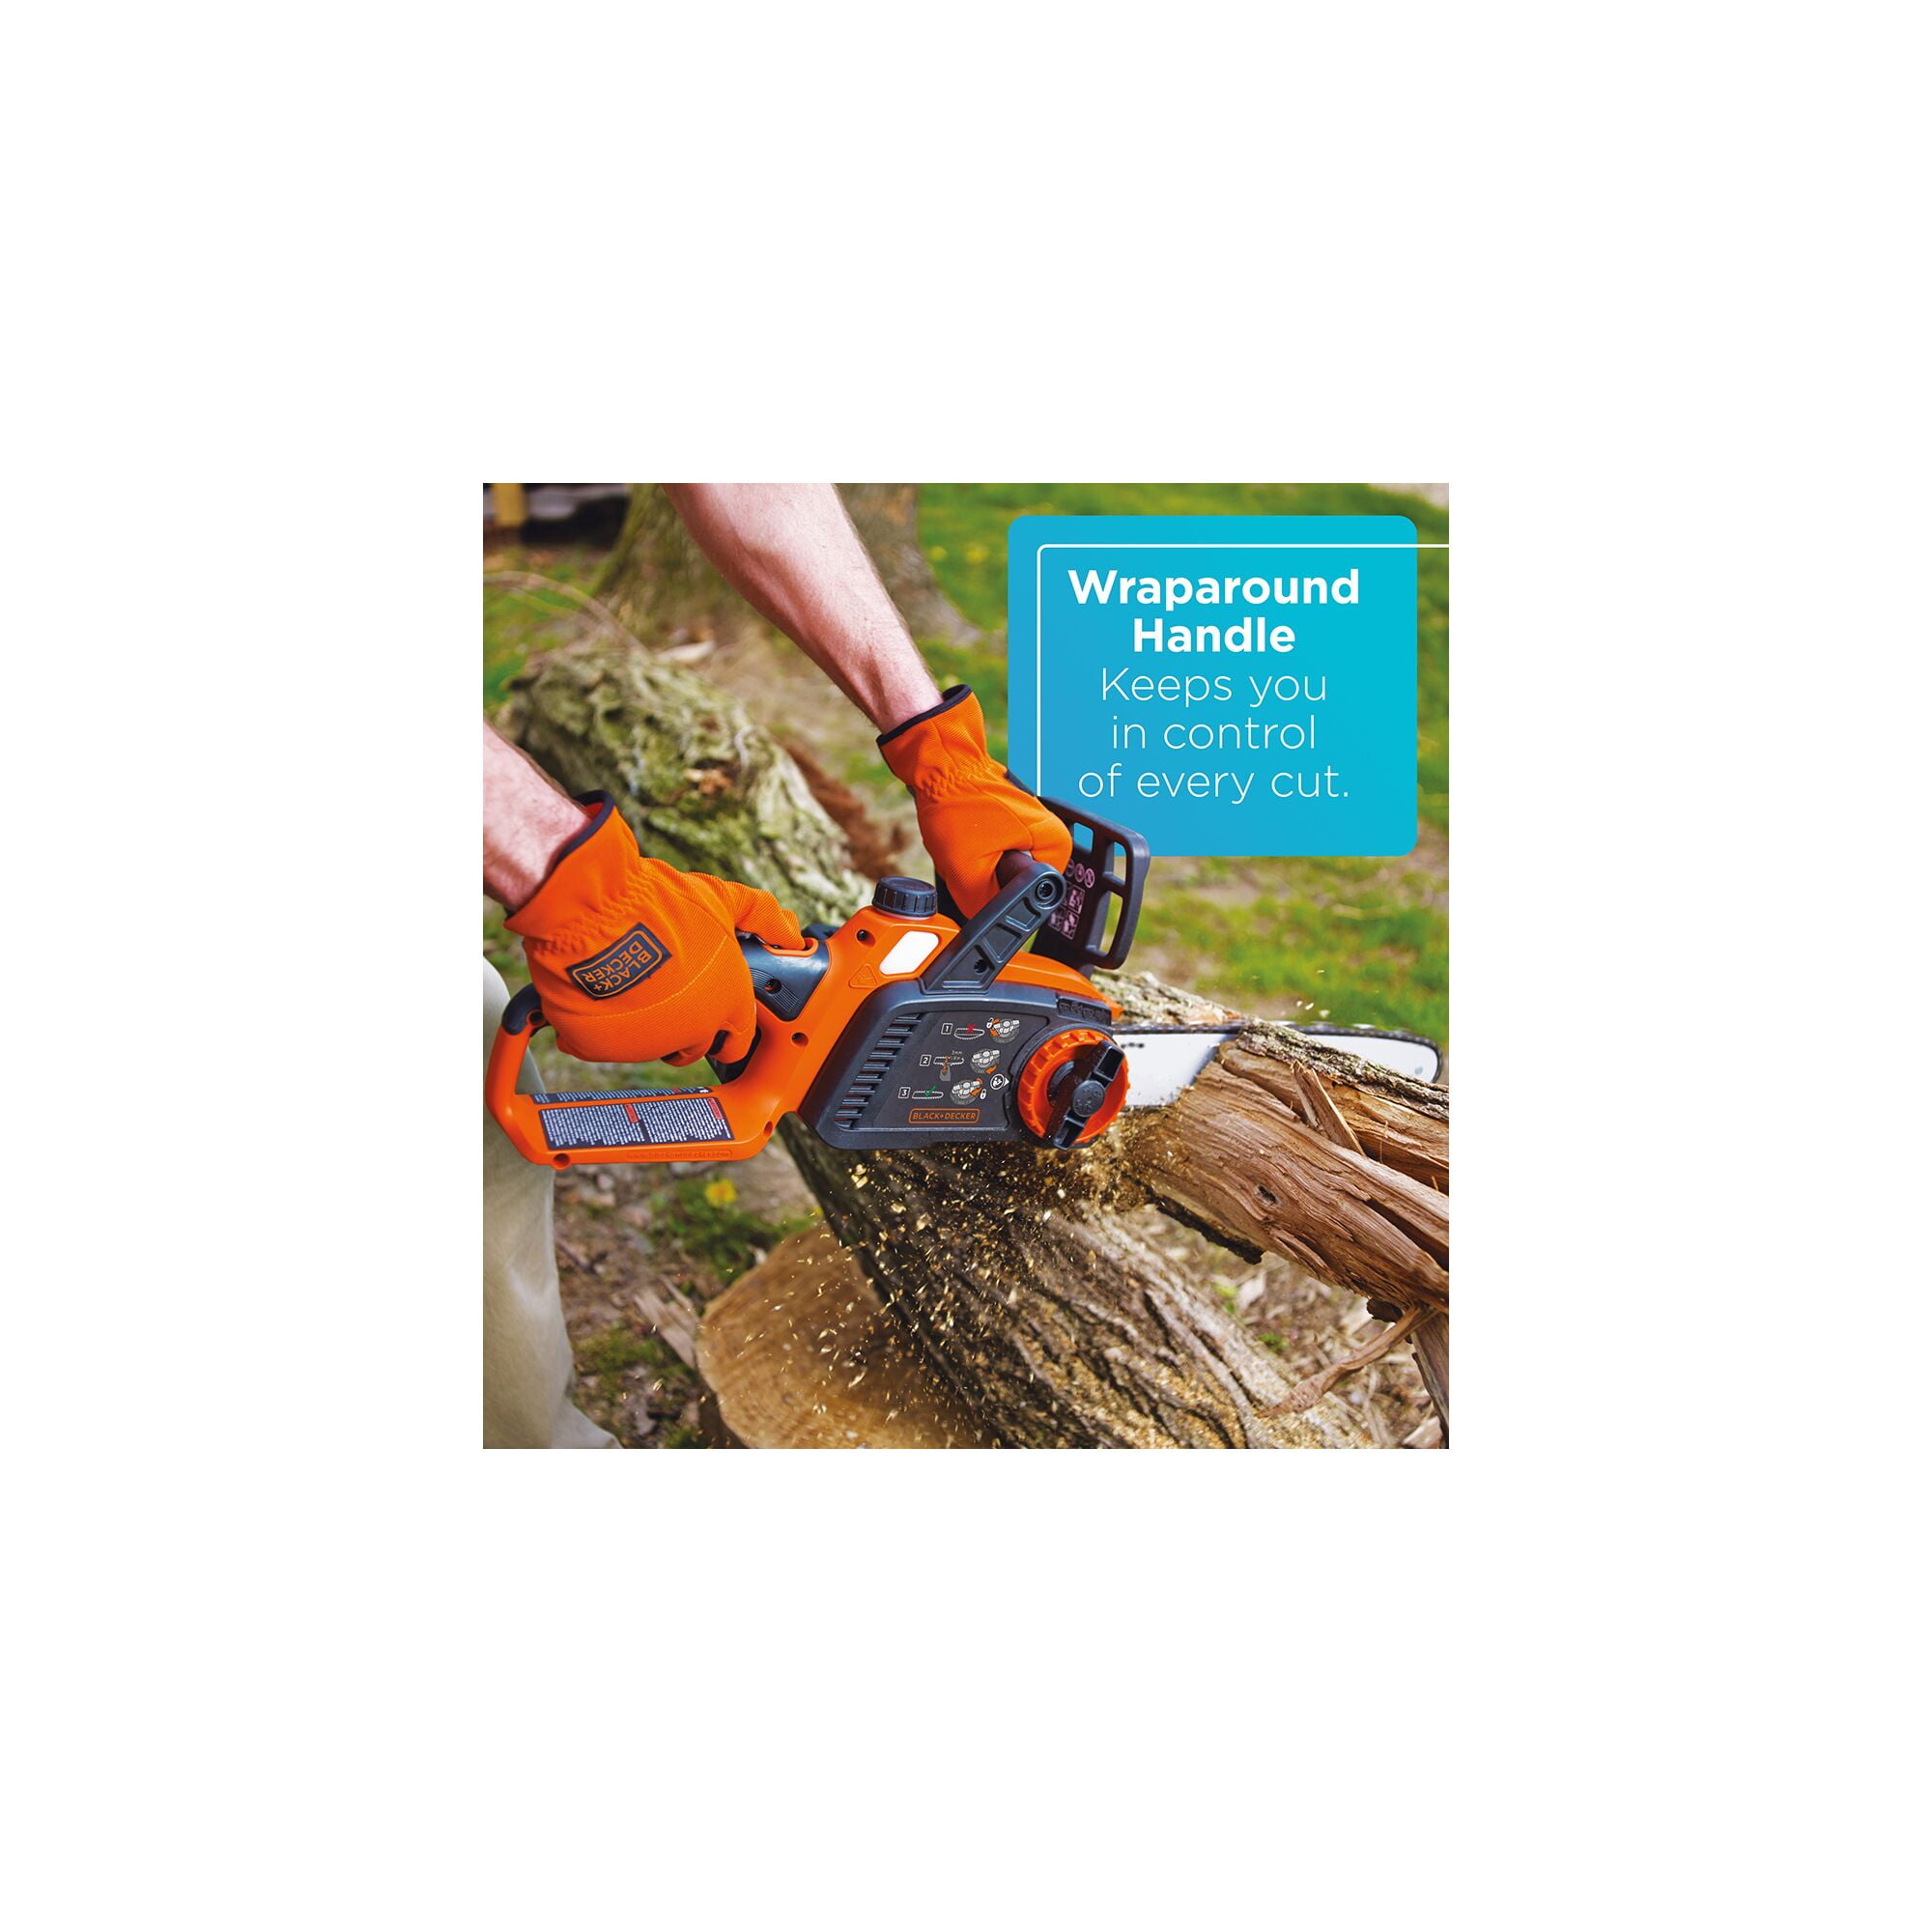 Black and Decker 20V Max Lithium Ion 8-Inch Chain Saw – Tools